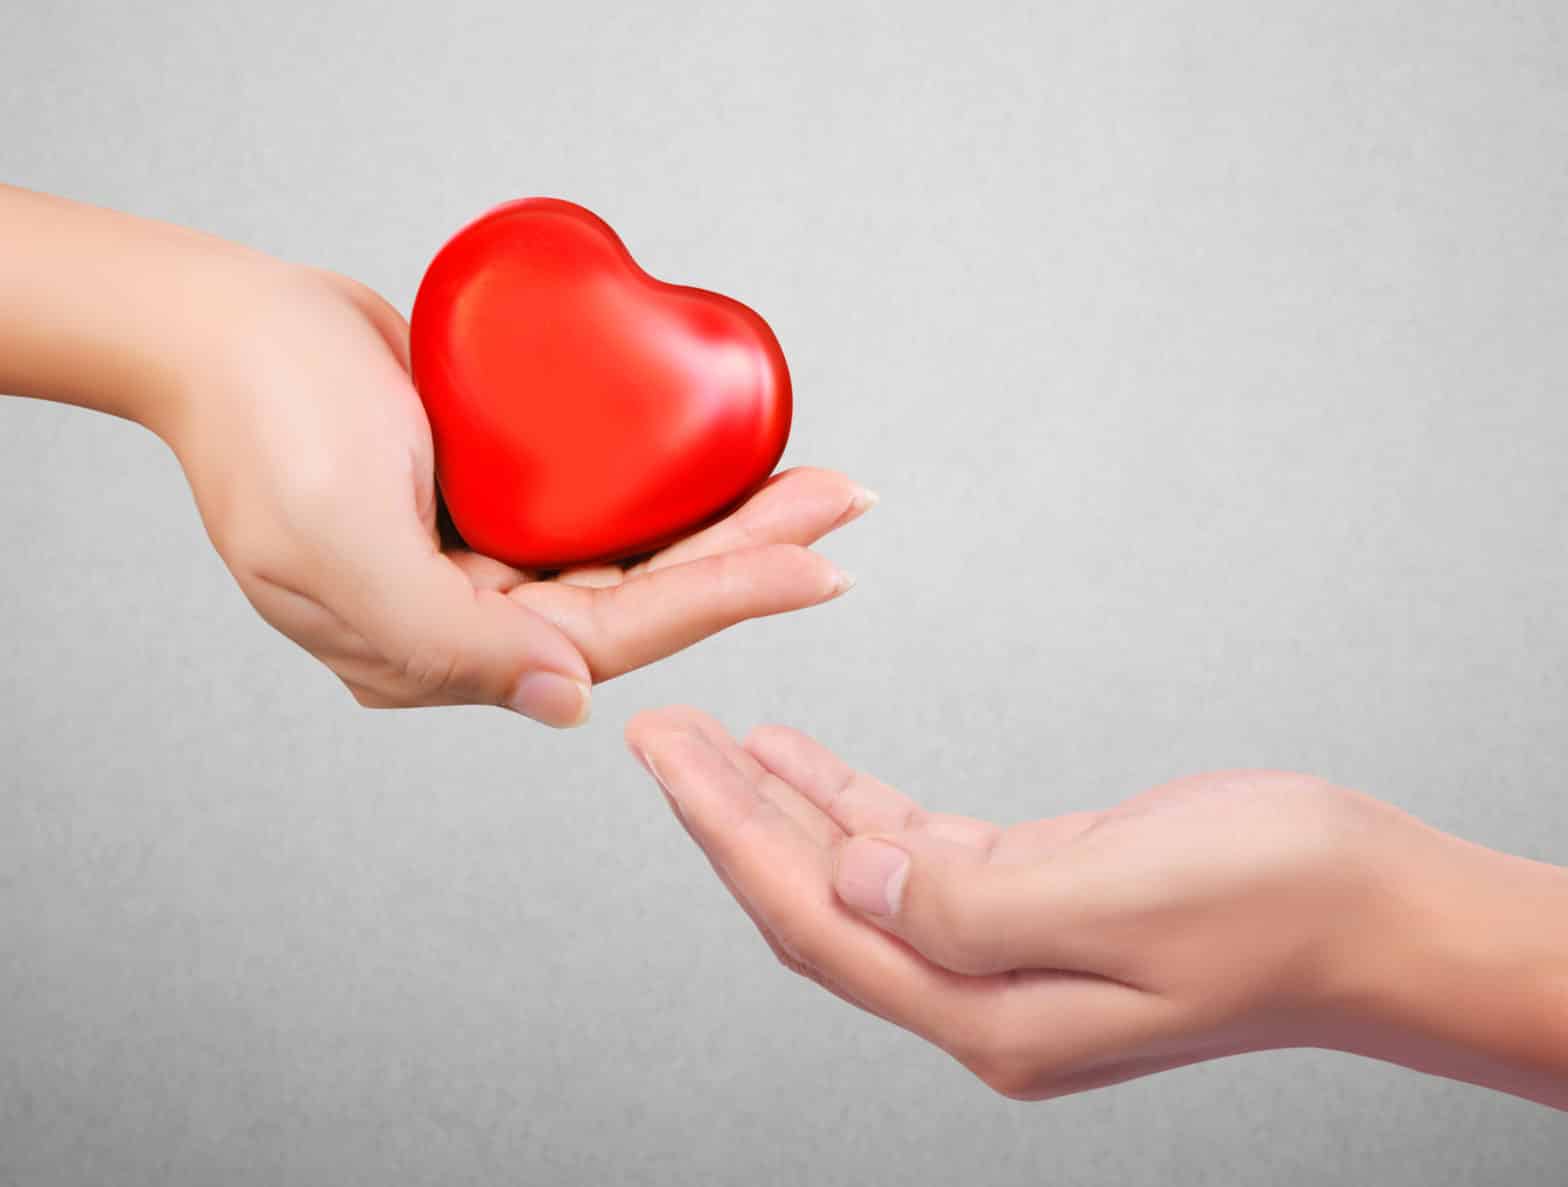 (Image: a hand holding a heart, giving it as a gift) 10 Tips Relationship advice for Couples & the Lonely Hearts, Joanne Tan, 10PlusBrand.com